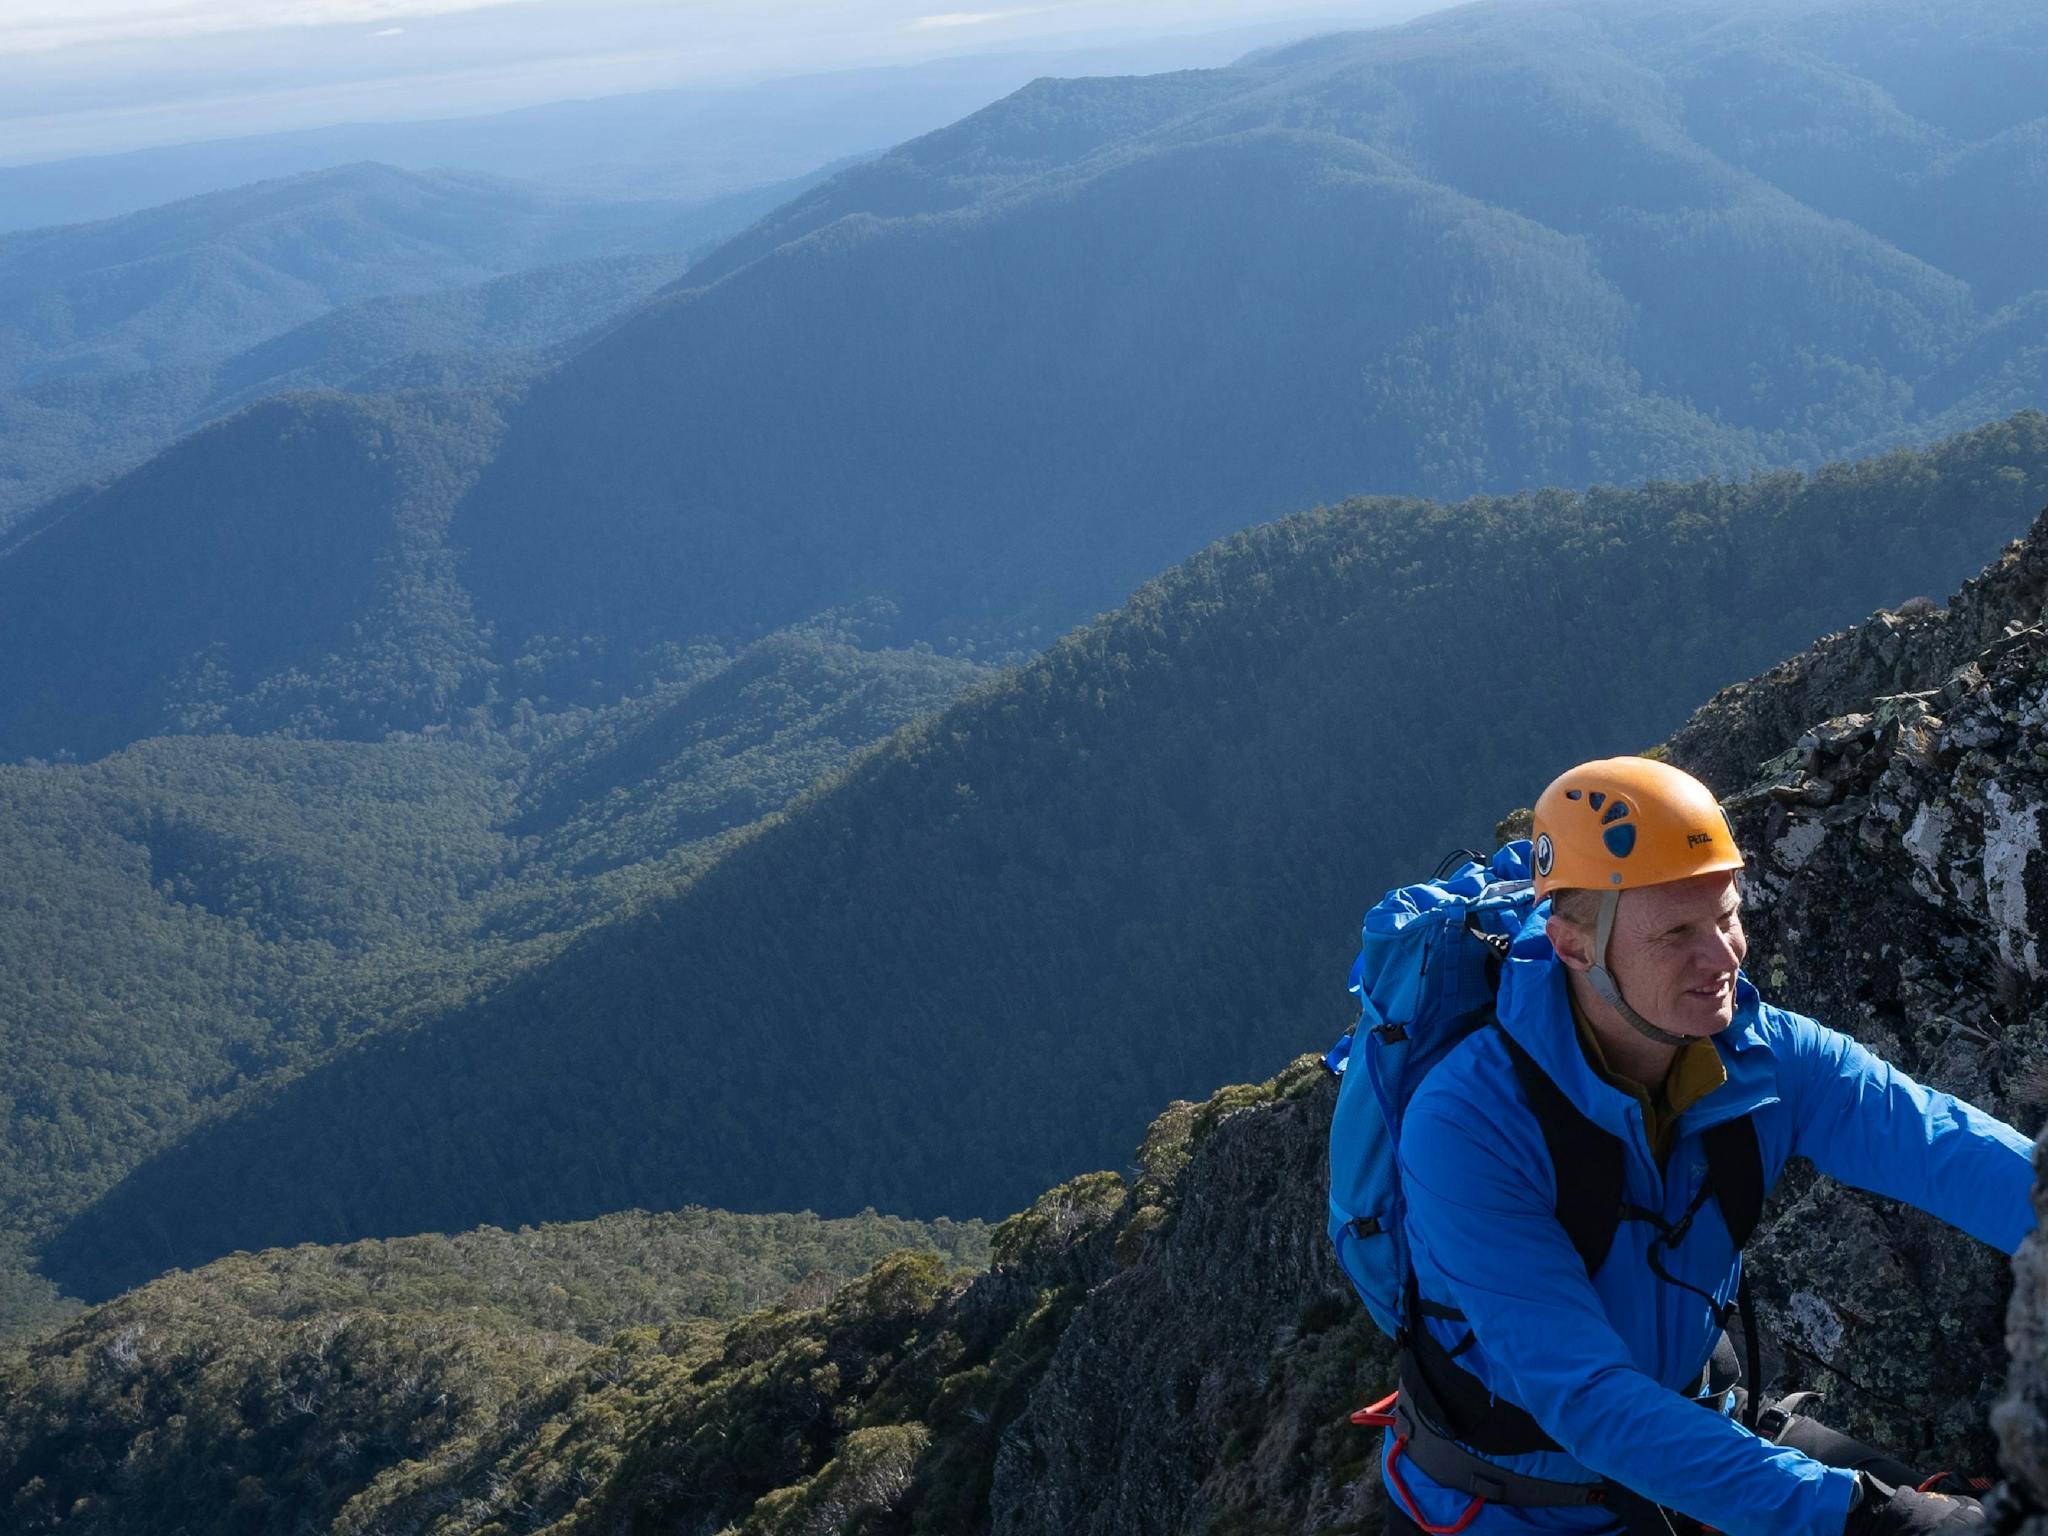 Climber in blue above the valley of bushland